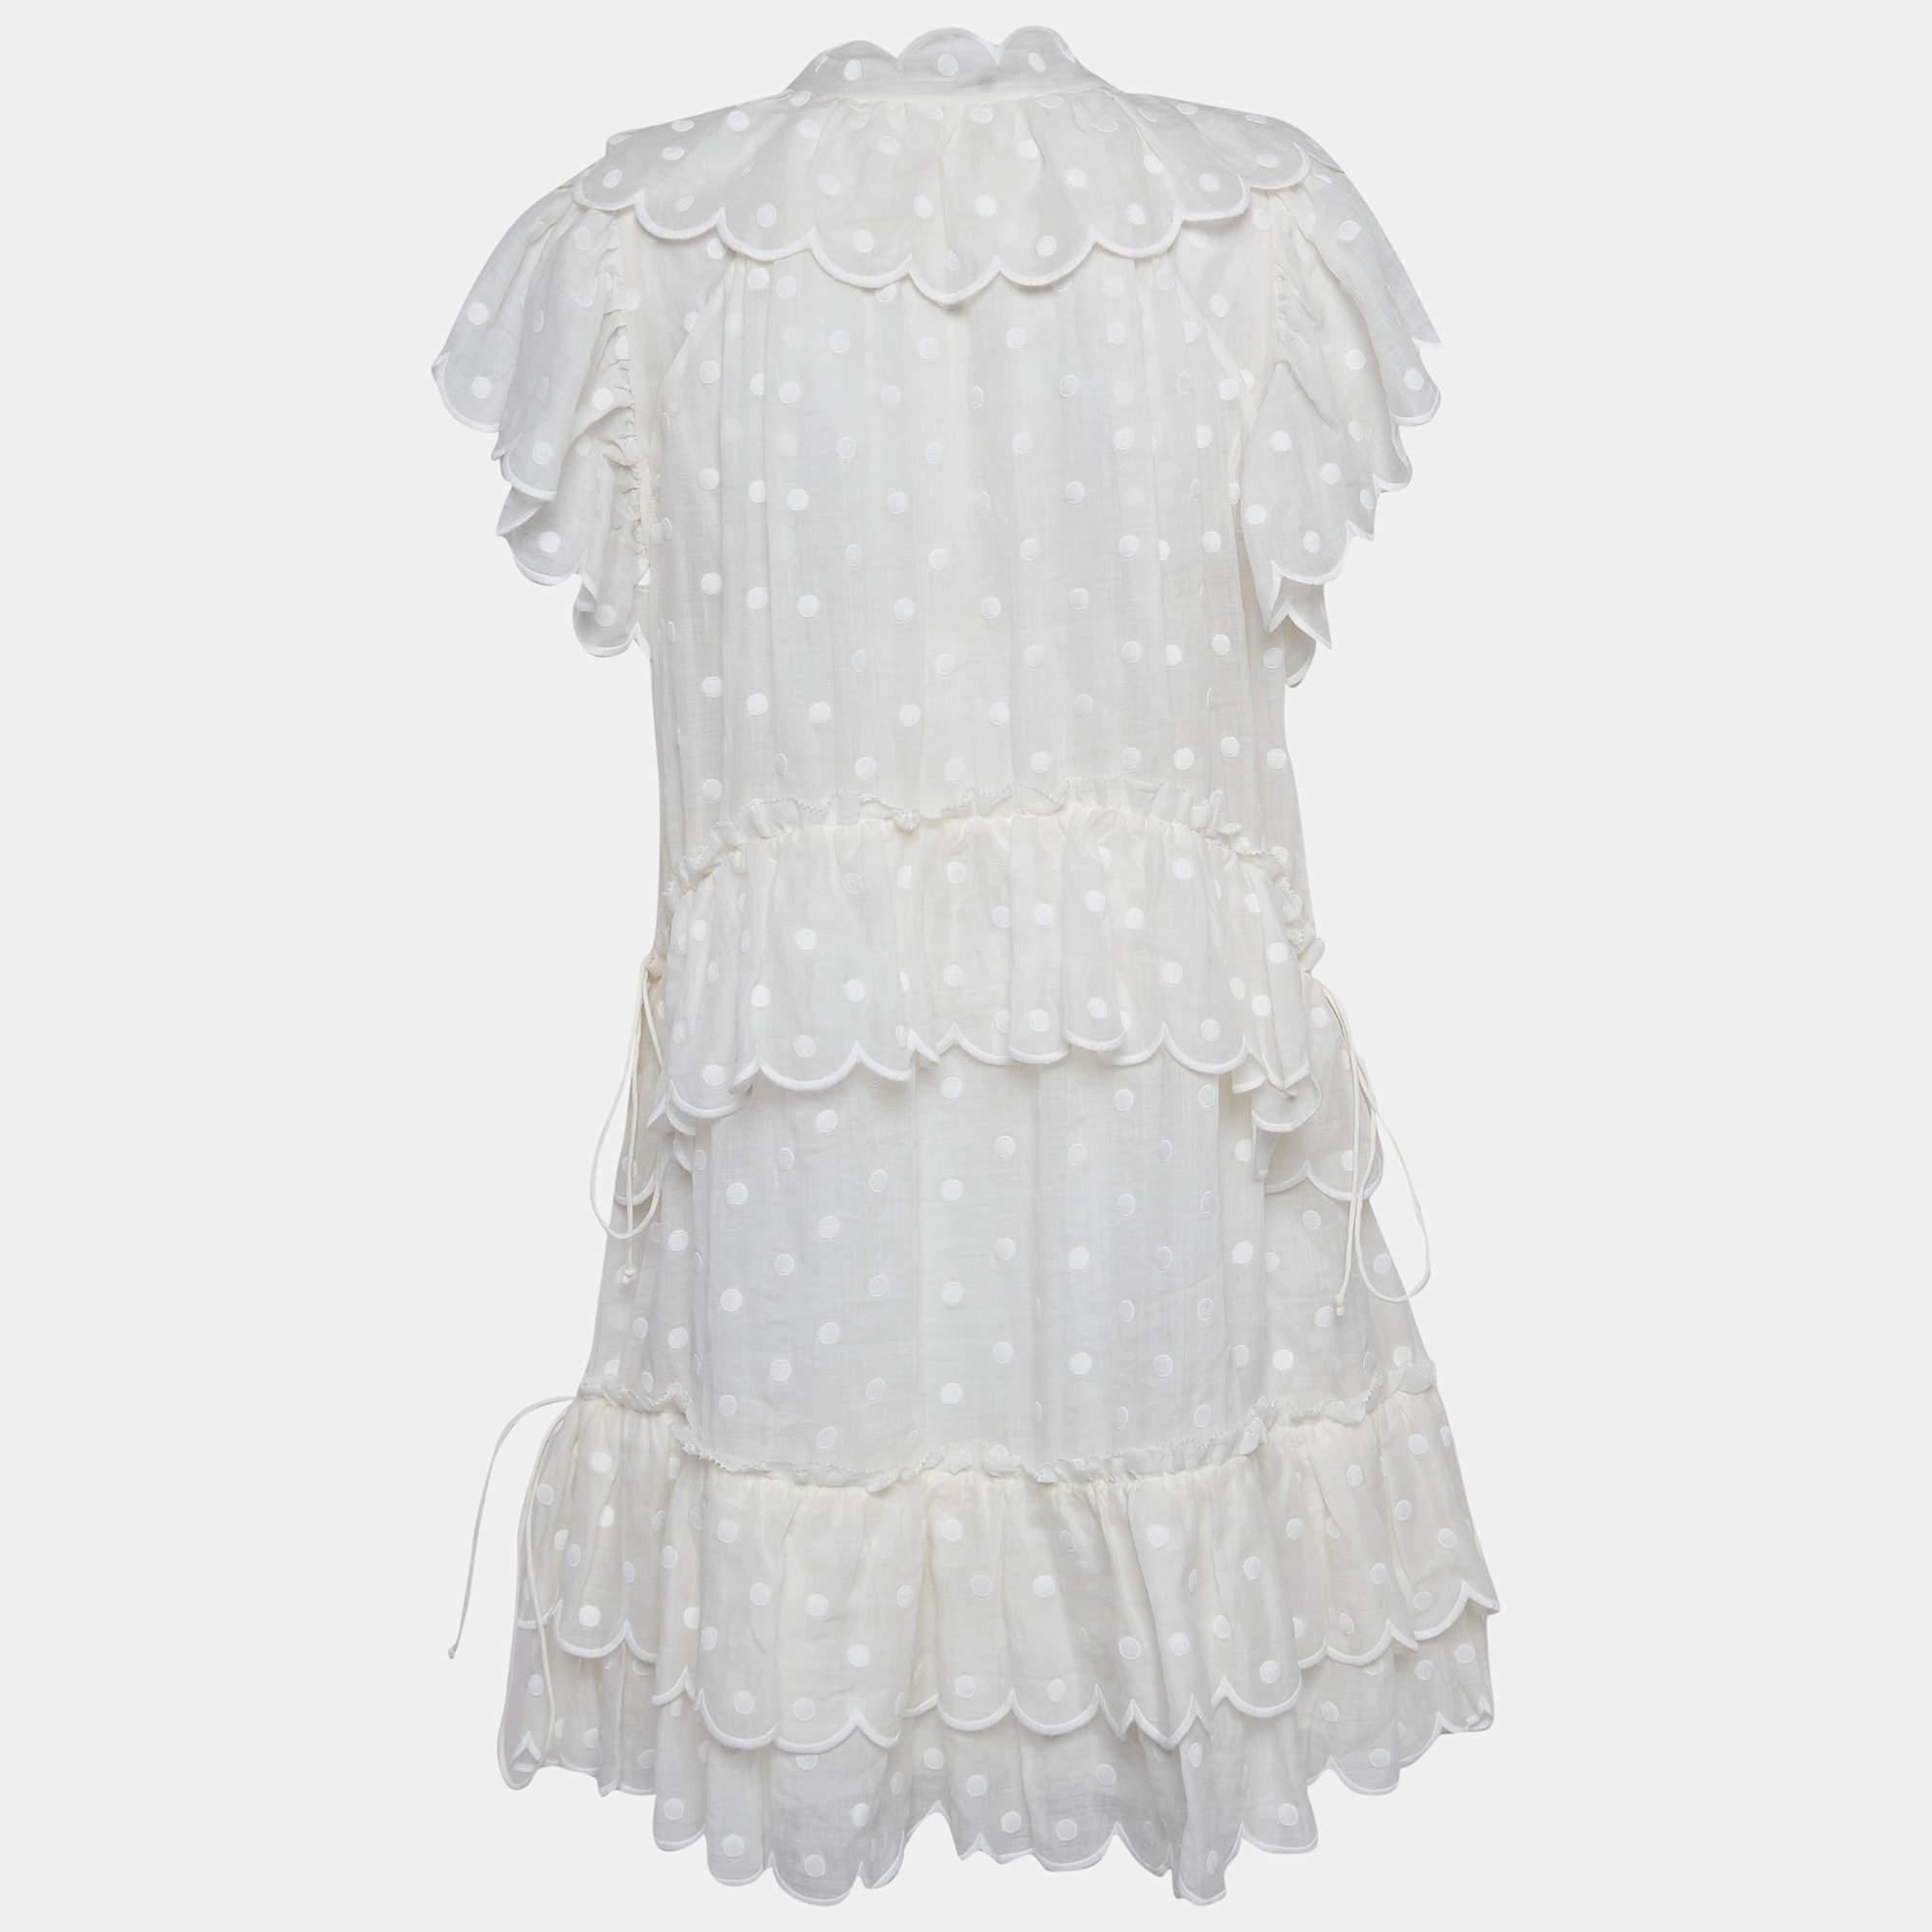 Dainty yet dynamic, the Zimmermann mini dess exudes charm with its delicate white polka dots dancing across airy ramie fabric. The tiered design adds playful movement, while intricate embroidery adds a touch of artisanal craftsmanship. Perfect for a